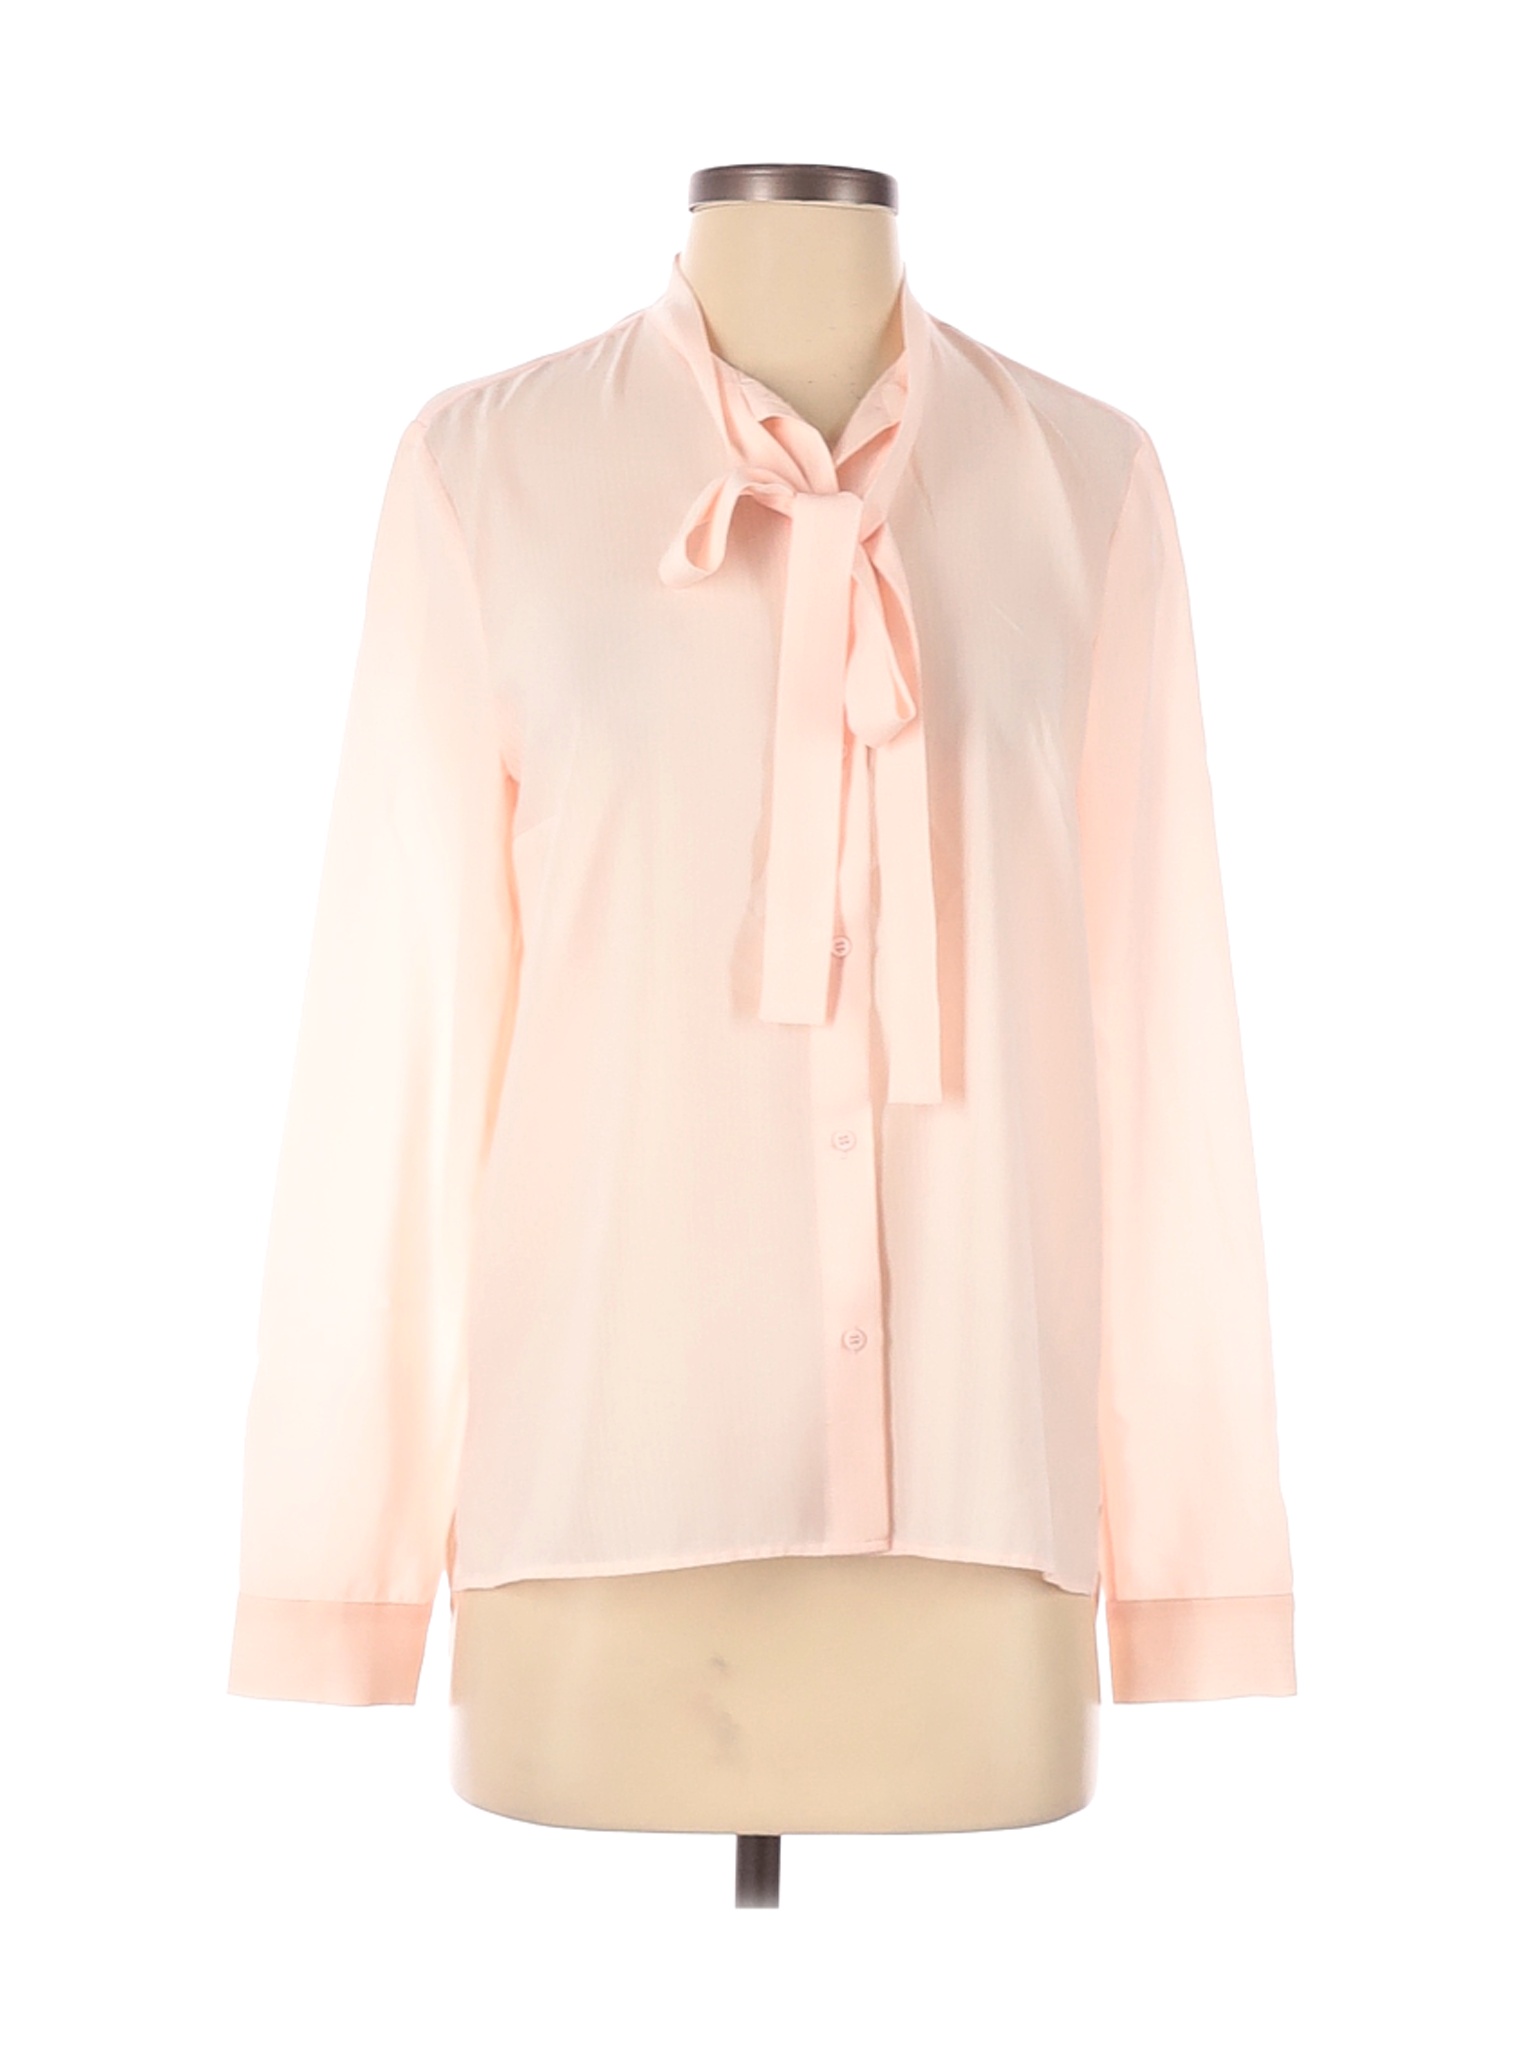 French Connection Women Pink Long Sleeve Blouse 6 | eBay